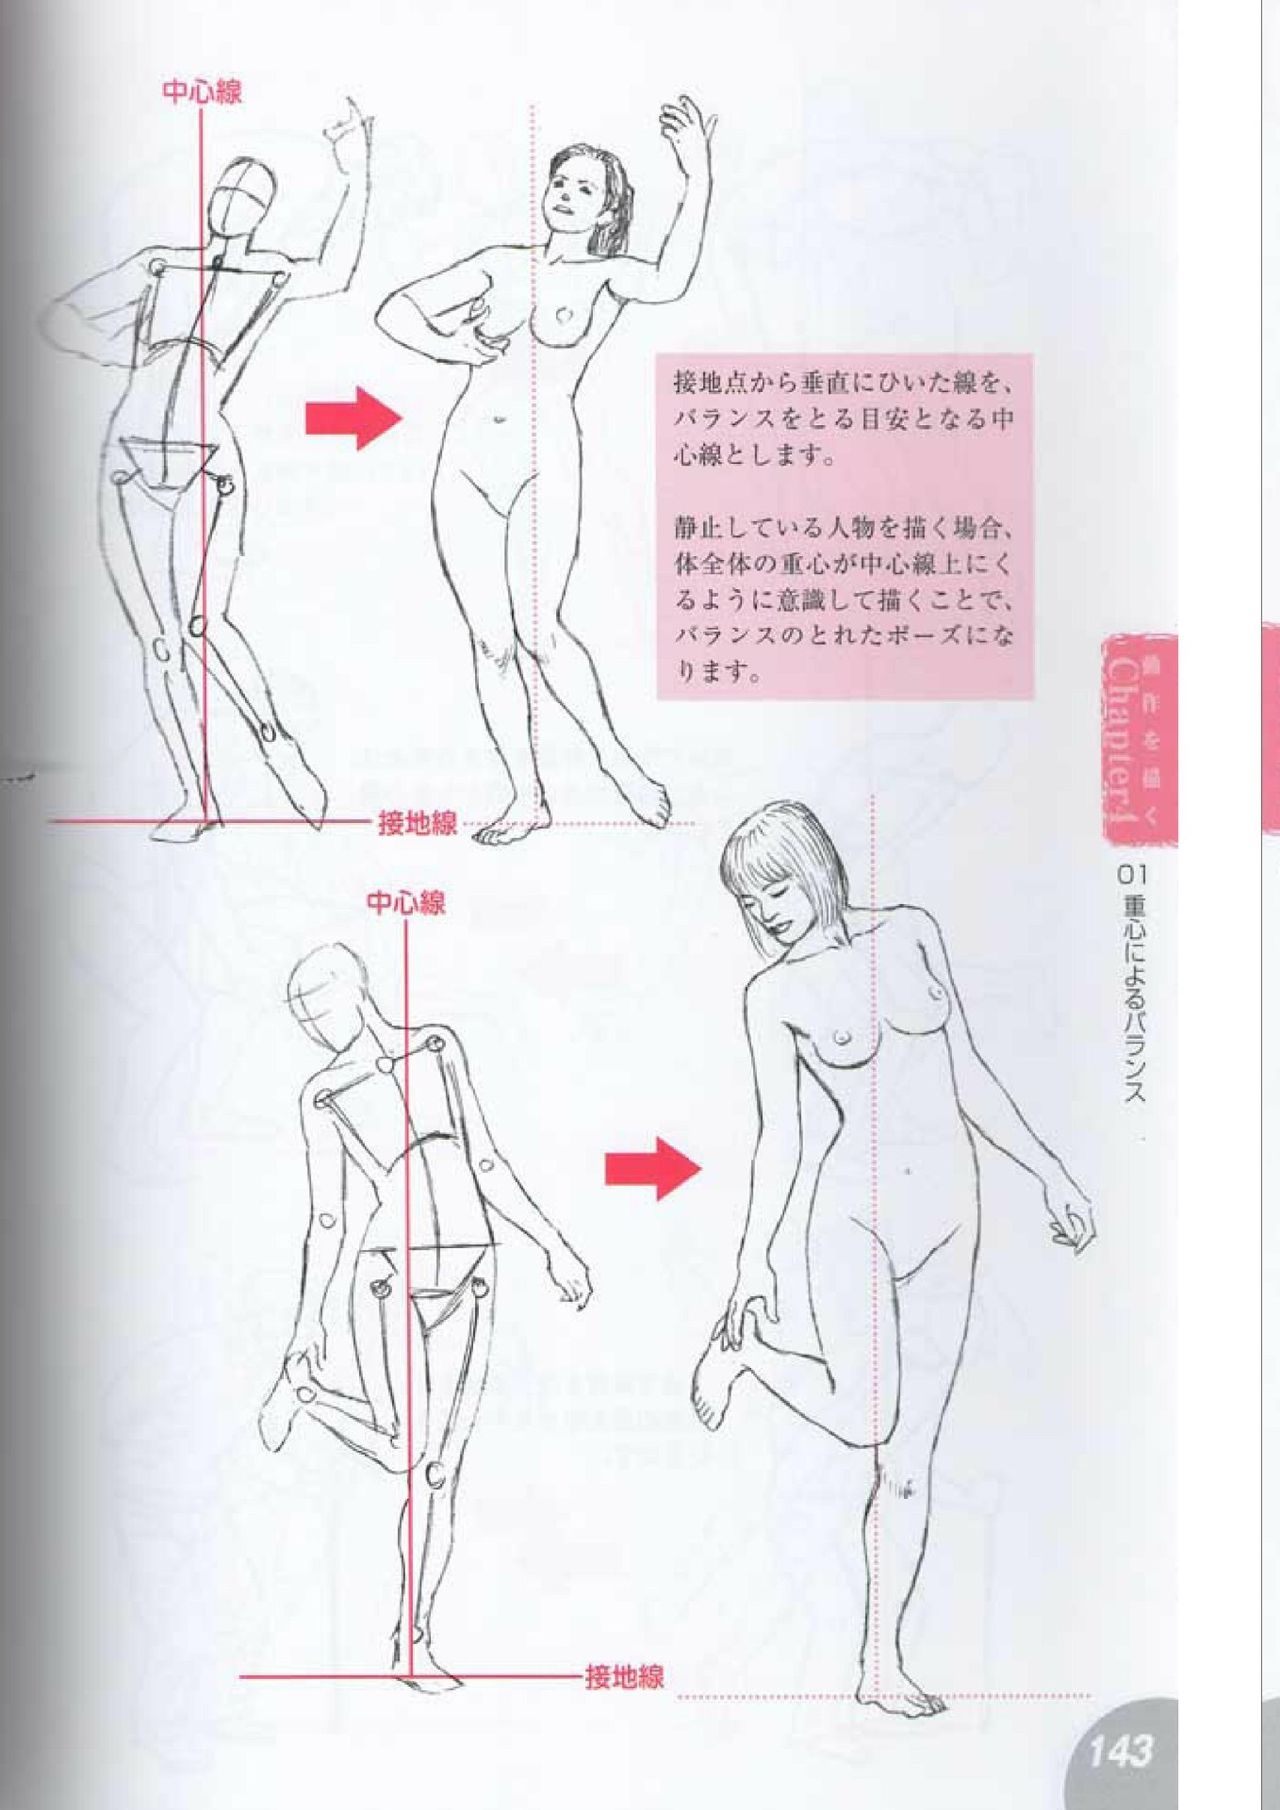 How to draw a character drawing from a human anatomical chart 141